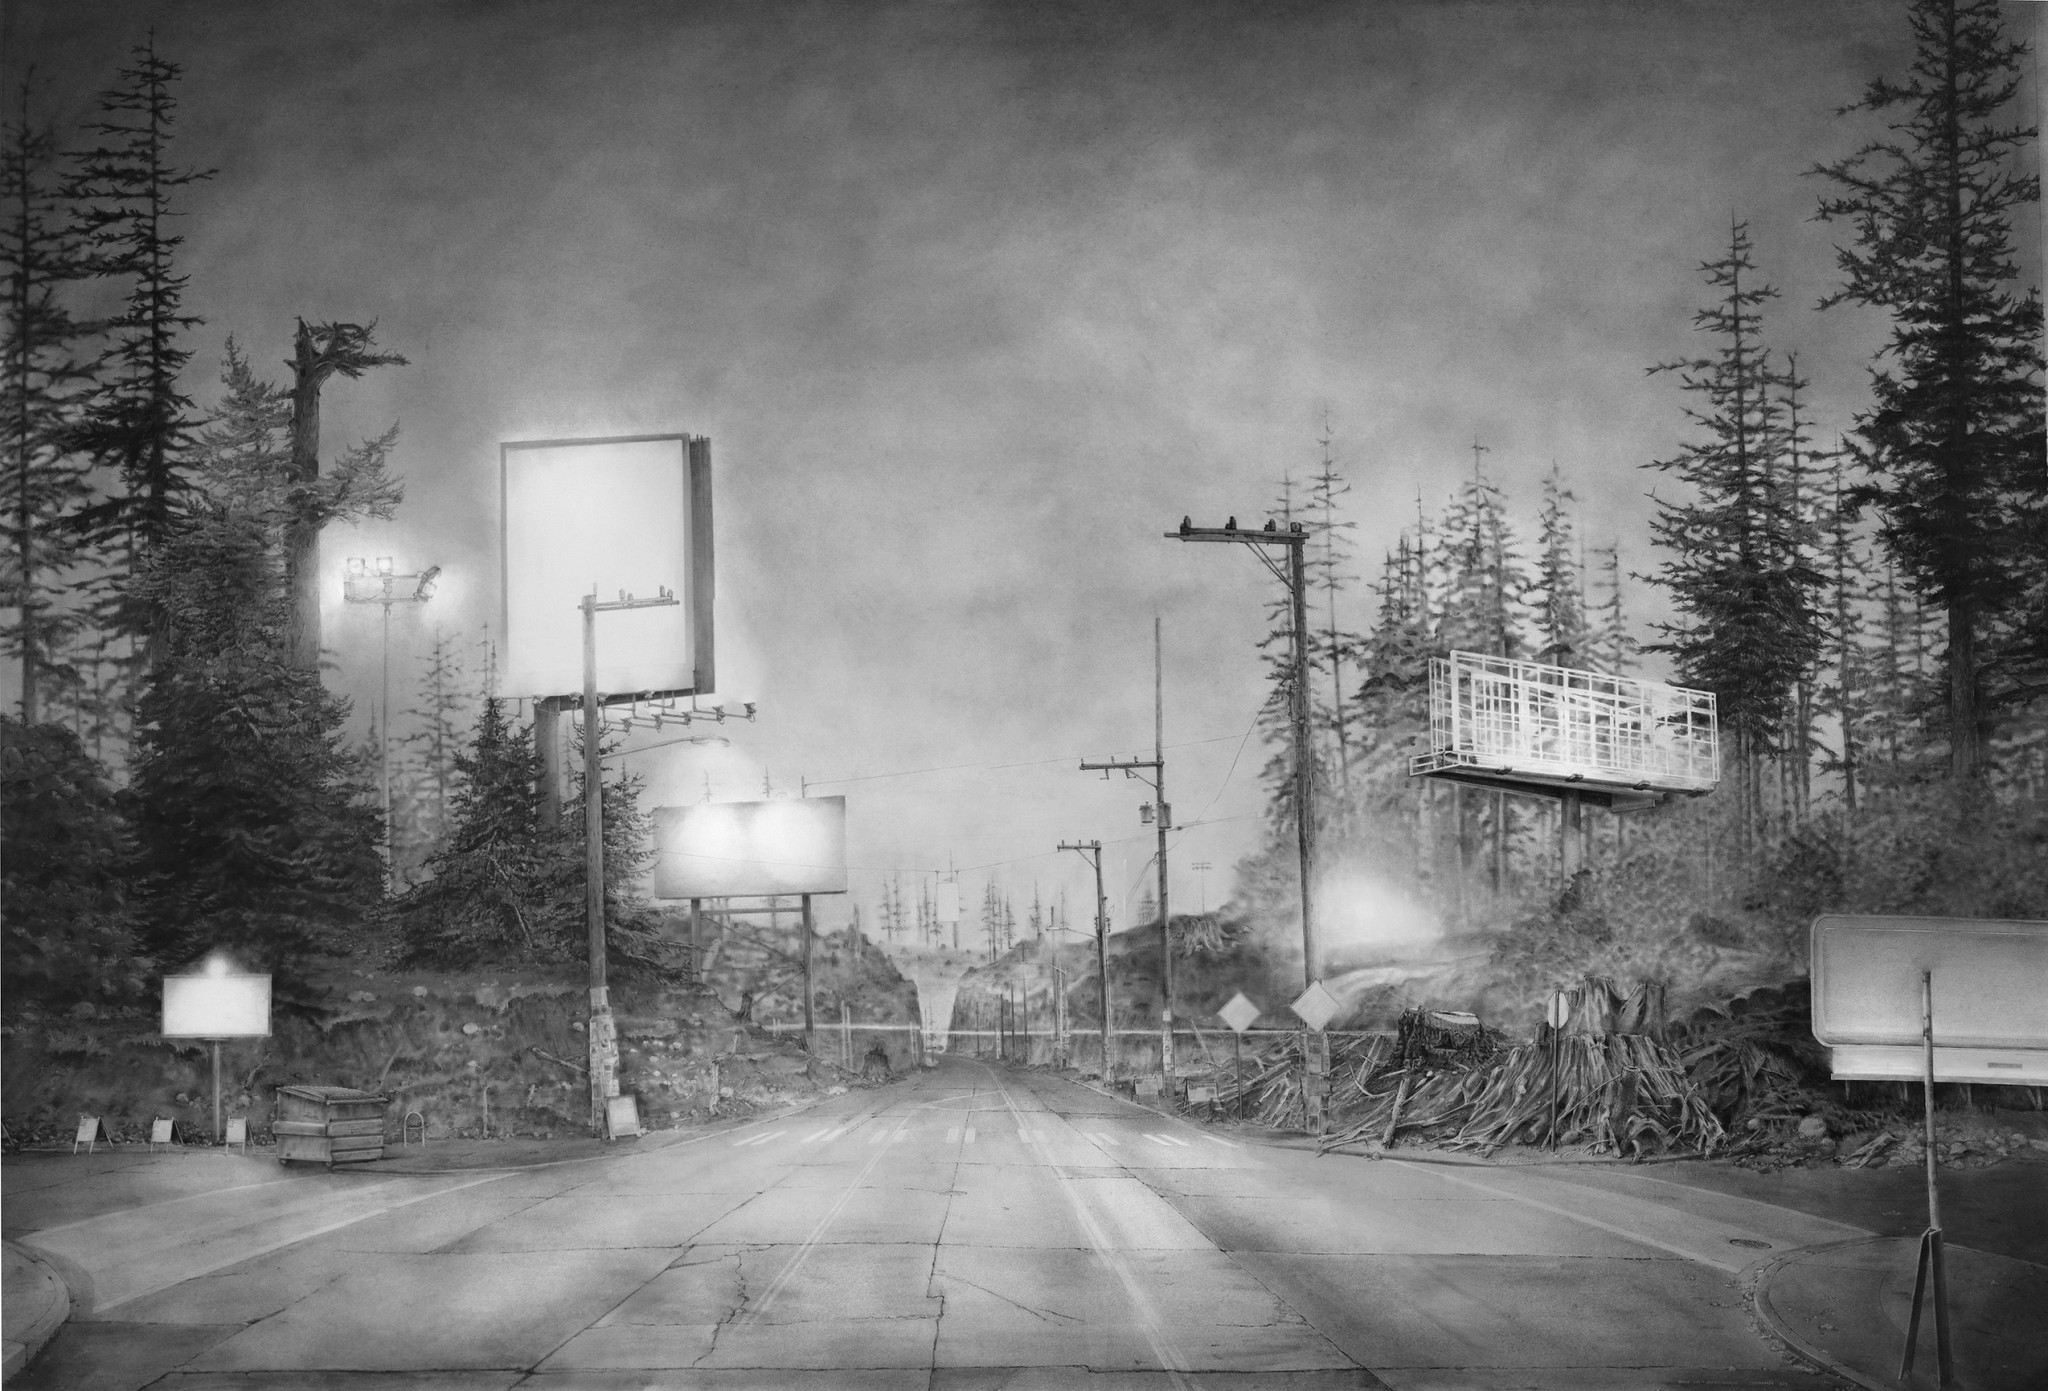 Lead Pencil Studio, "A Clearing," 2015, charcoal, graphite, ink